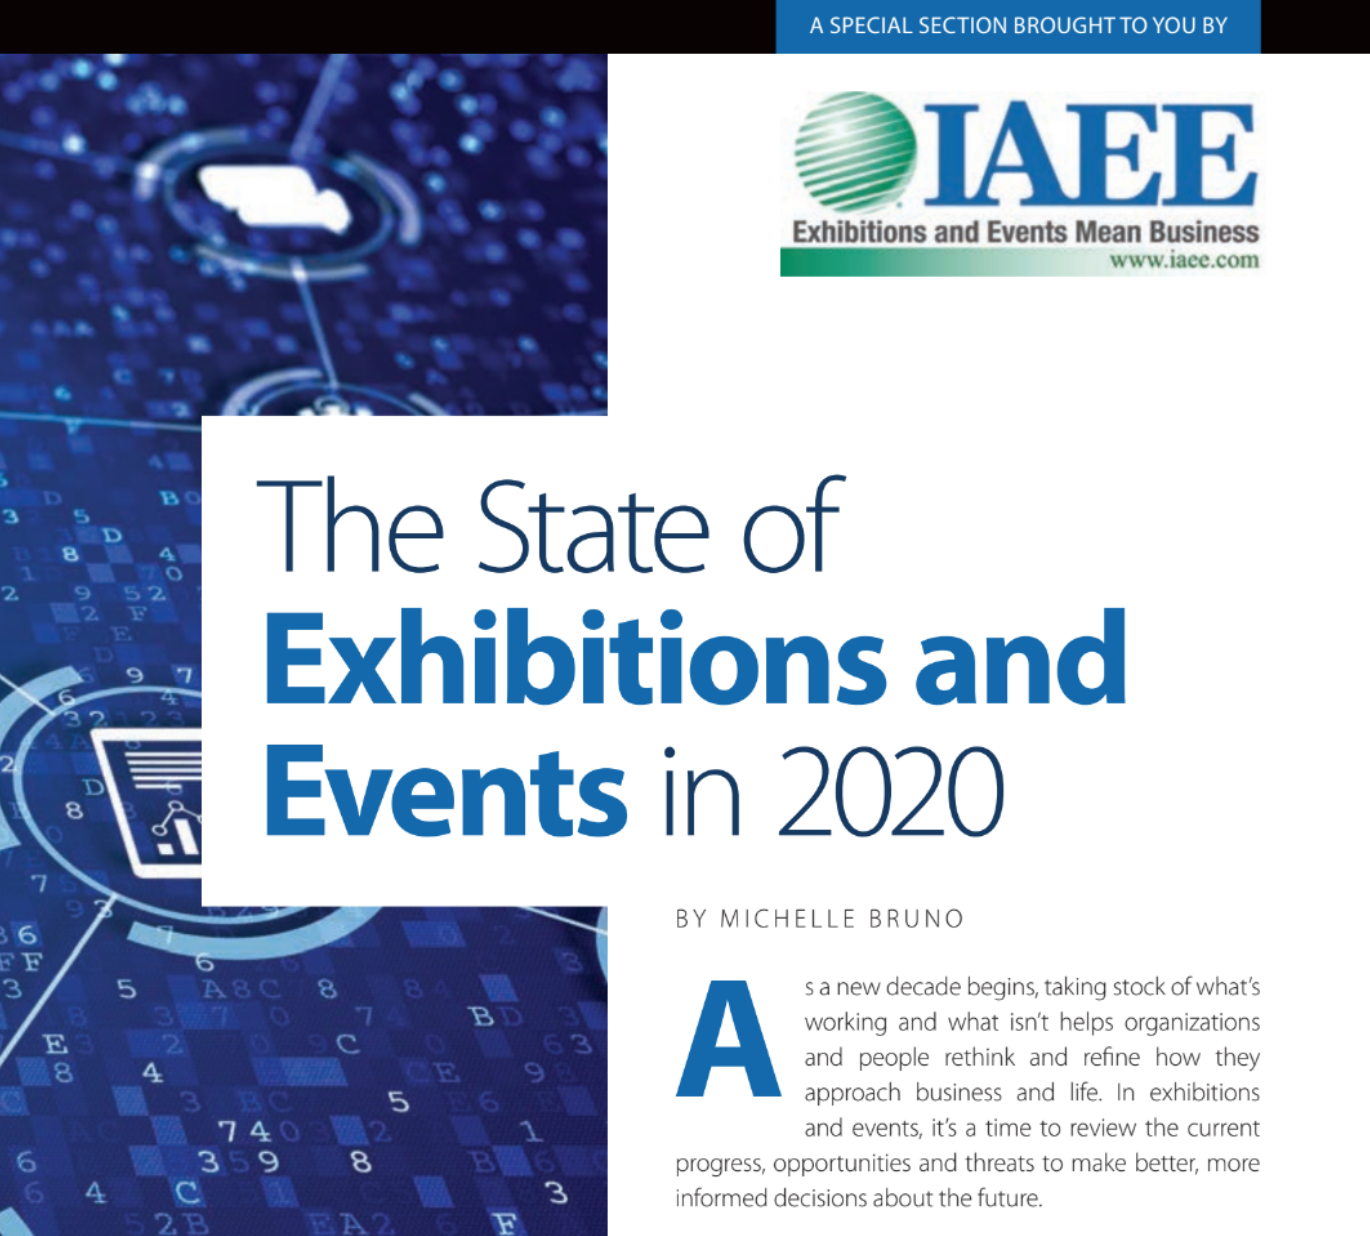 The State of Exhibitions and Events in 2020